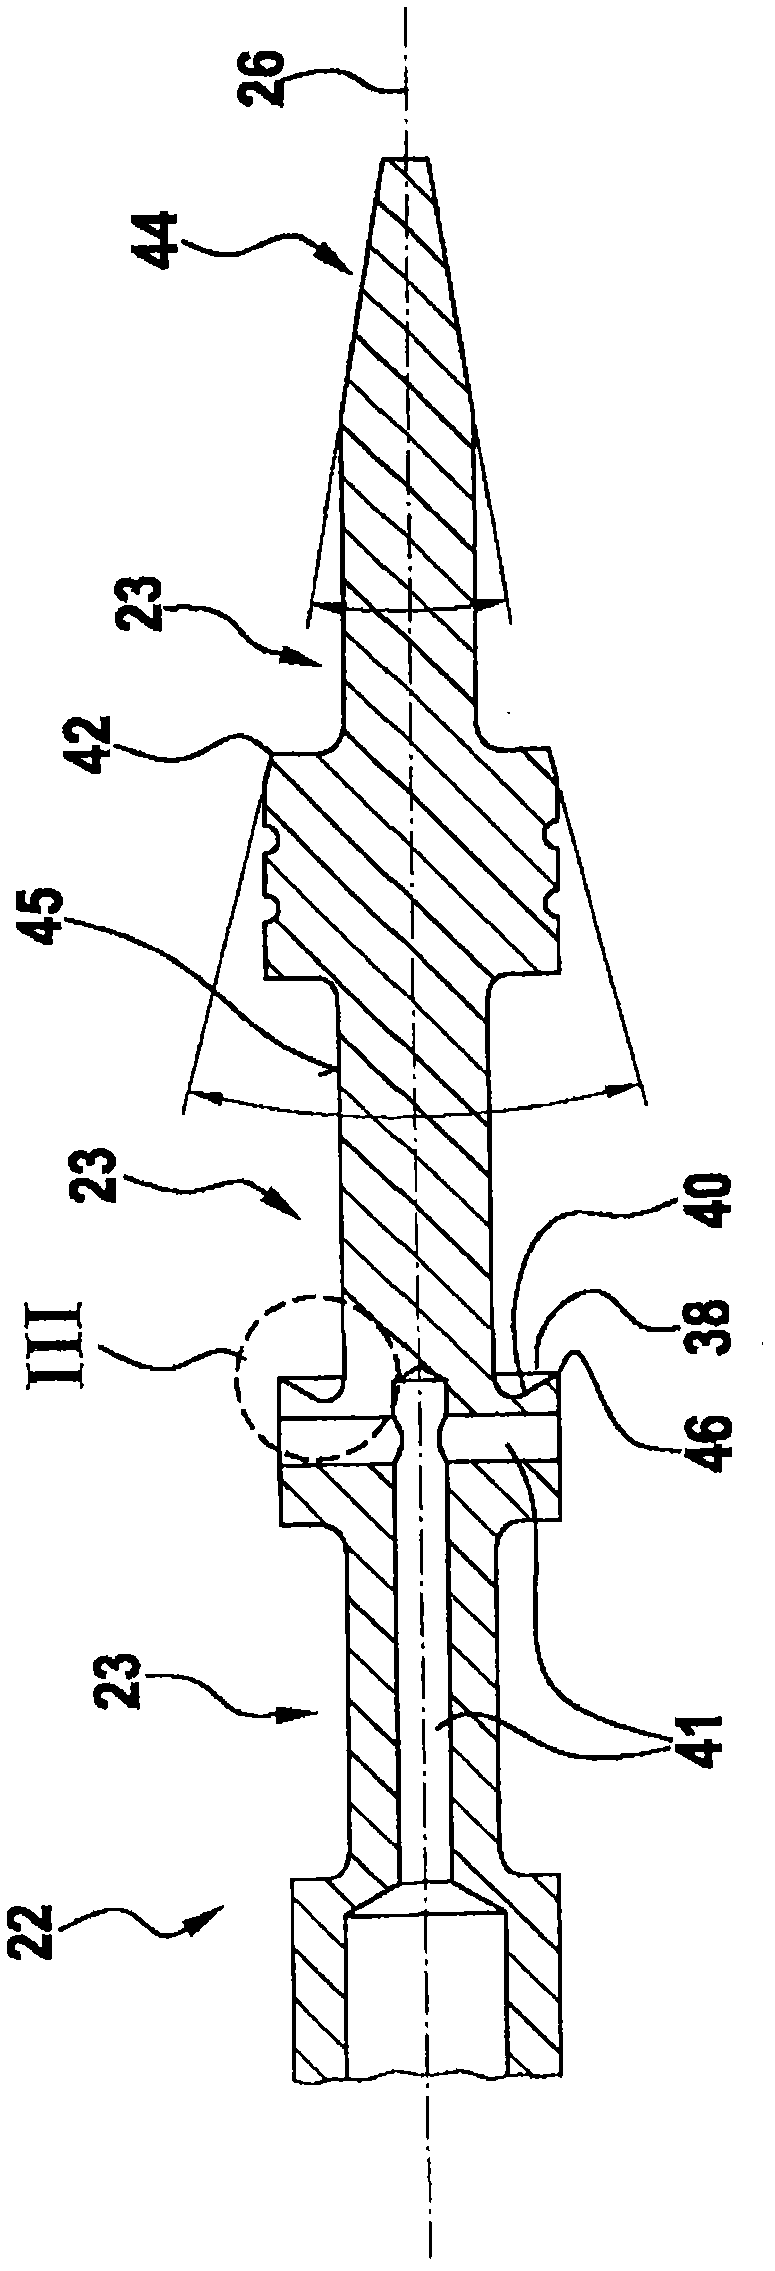 Pressure regulating valve, particularly for controlling a clutch in a motor vehicle automatic transmission